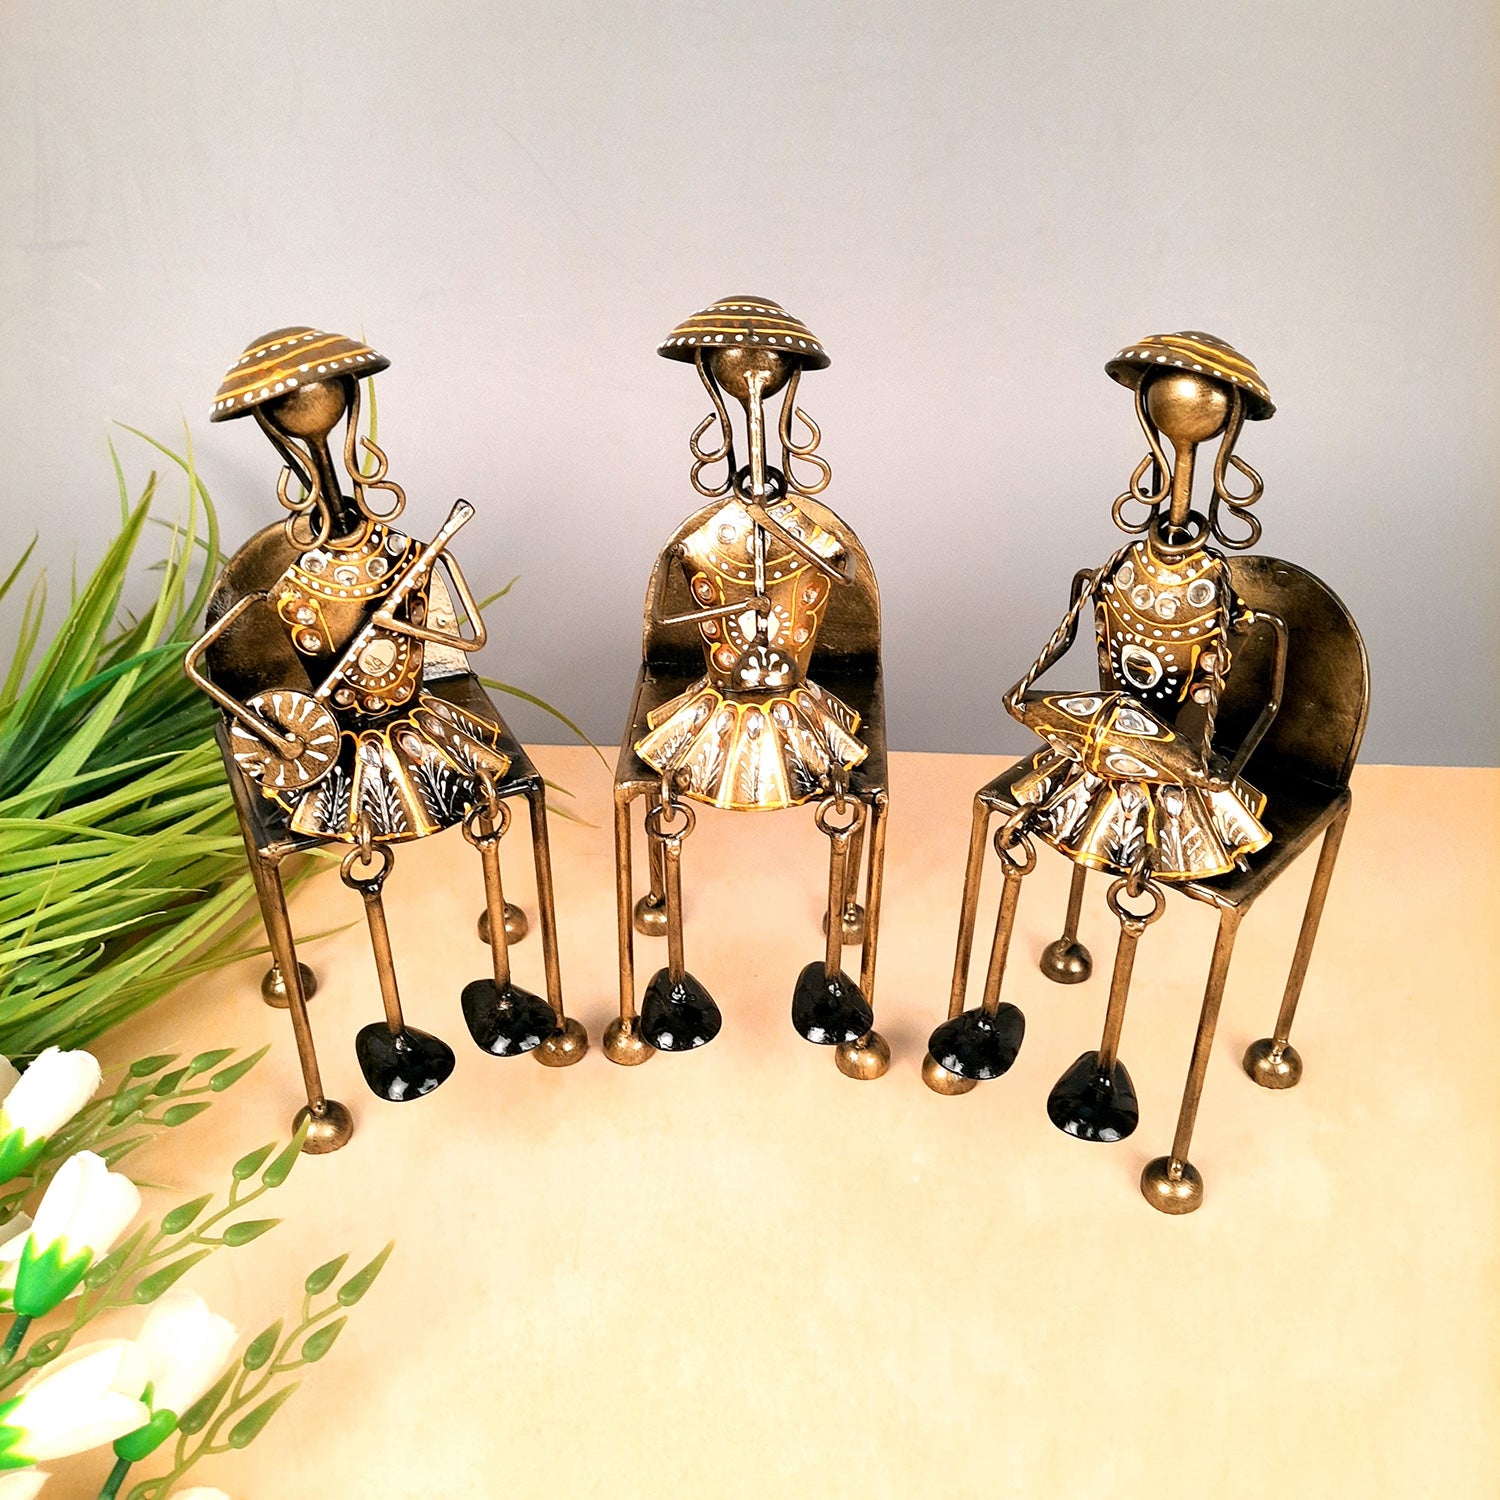 Figurine Showpiece - Musicians Sitting On Chair With Hanging Legs | Artifacts for Home, Table, Living Room, TV Unit & Bedroom Decor | Decorative Show piece for Office Desk & Gifts - 12 Inch (Set of 3) - Apkamart